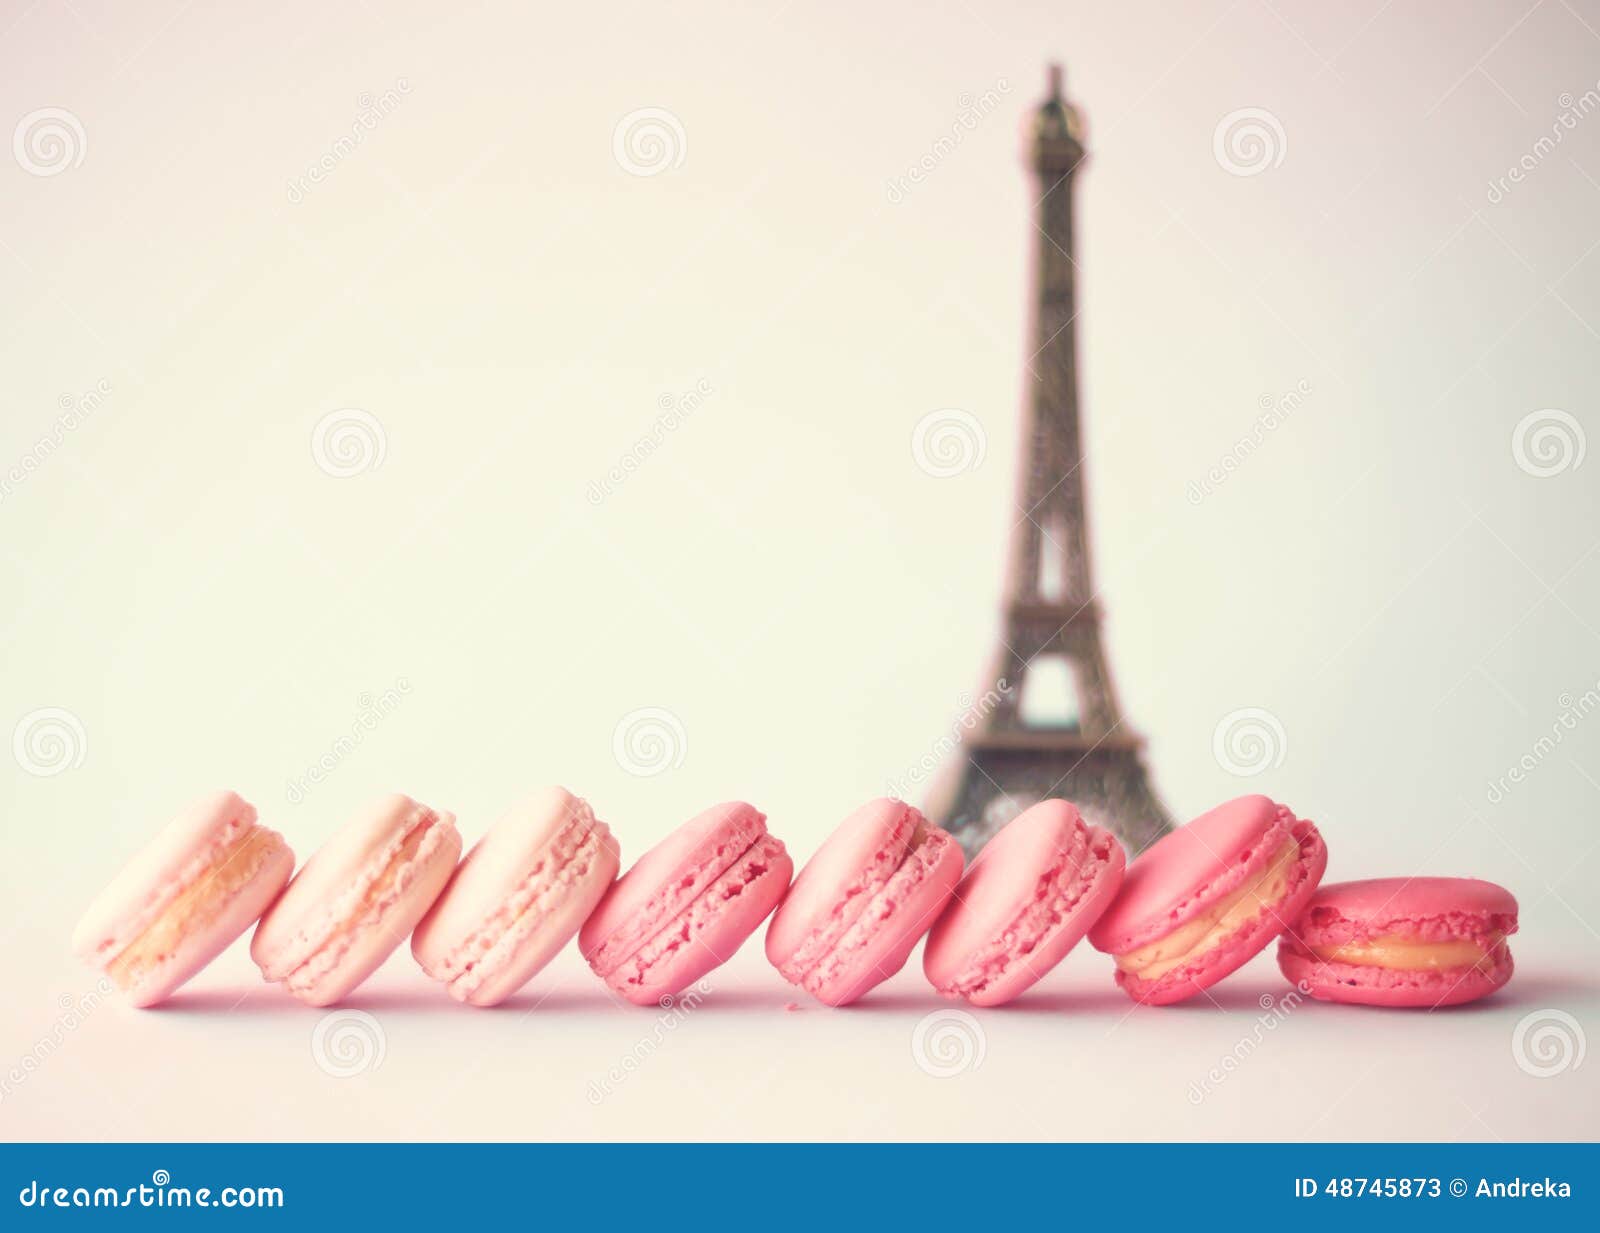 eiffel tower tumblr themes Photo Of Macaroons Line  Stock  48745873 Image: